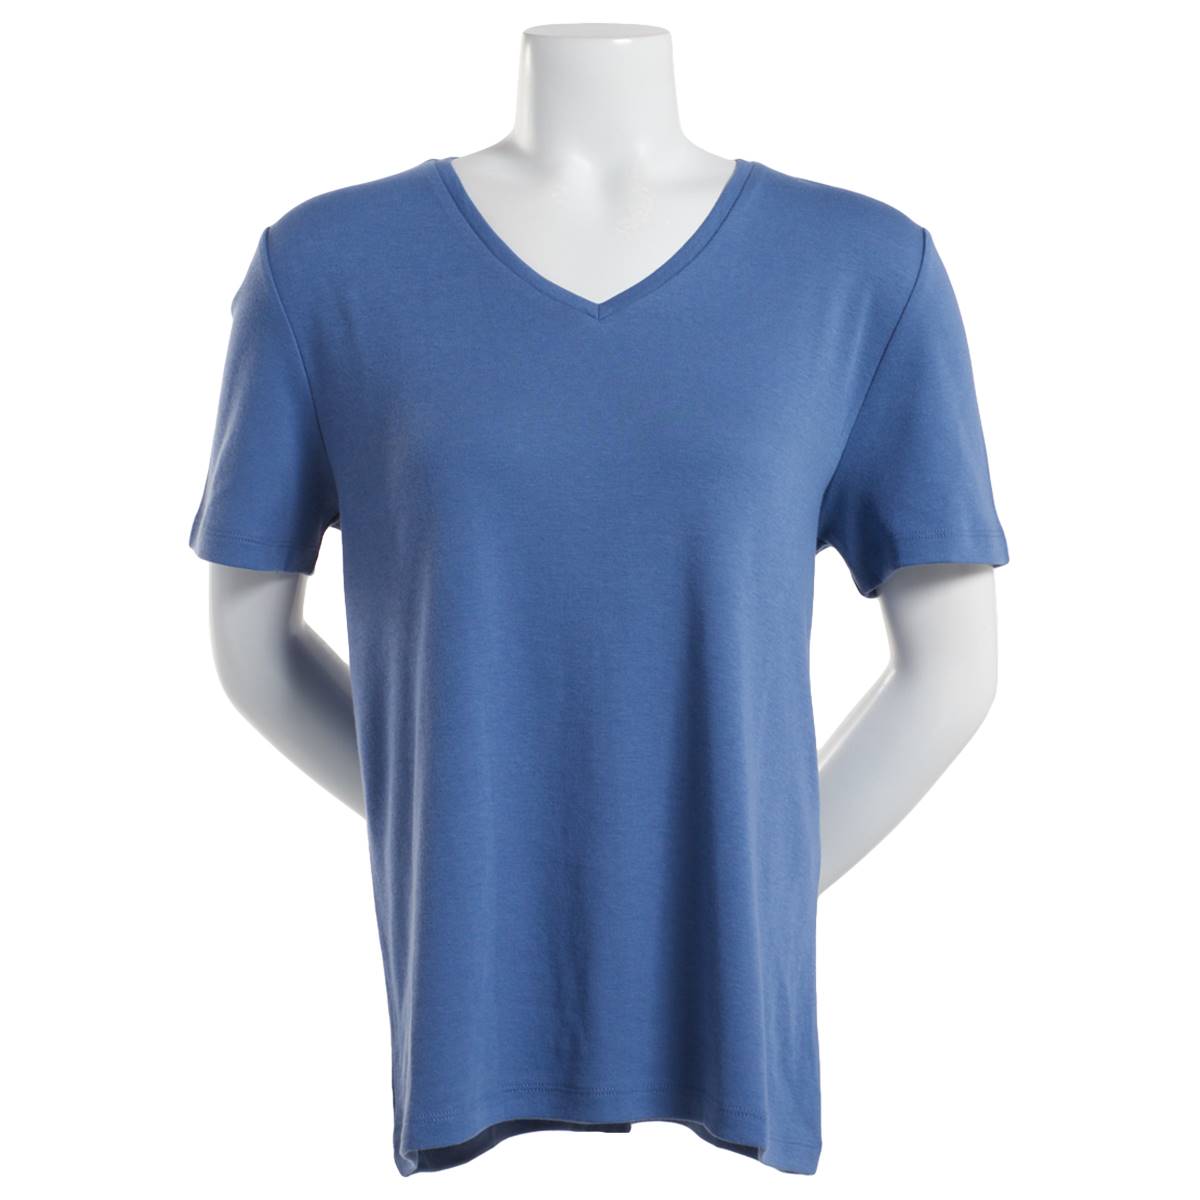 Petite Hasting & Smith Short Sleeve Solid V-Neck Tee